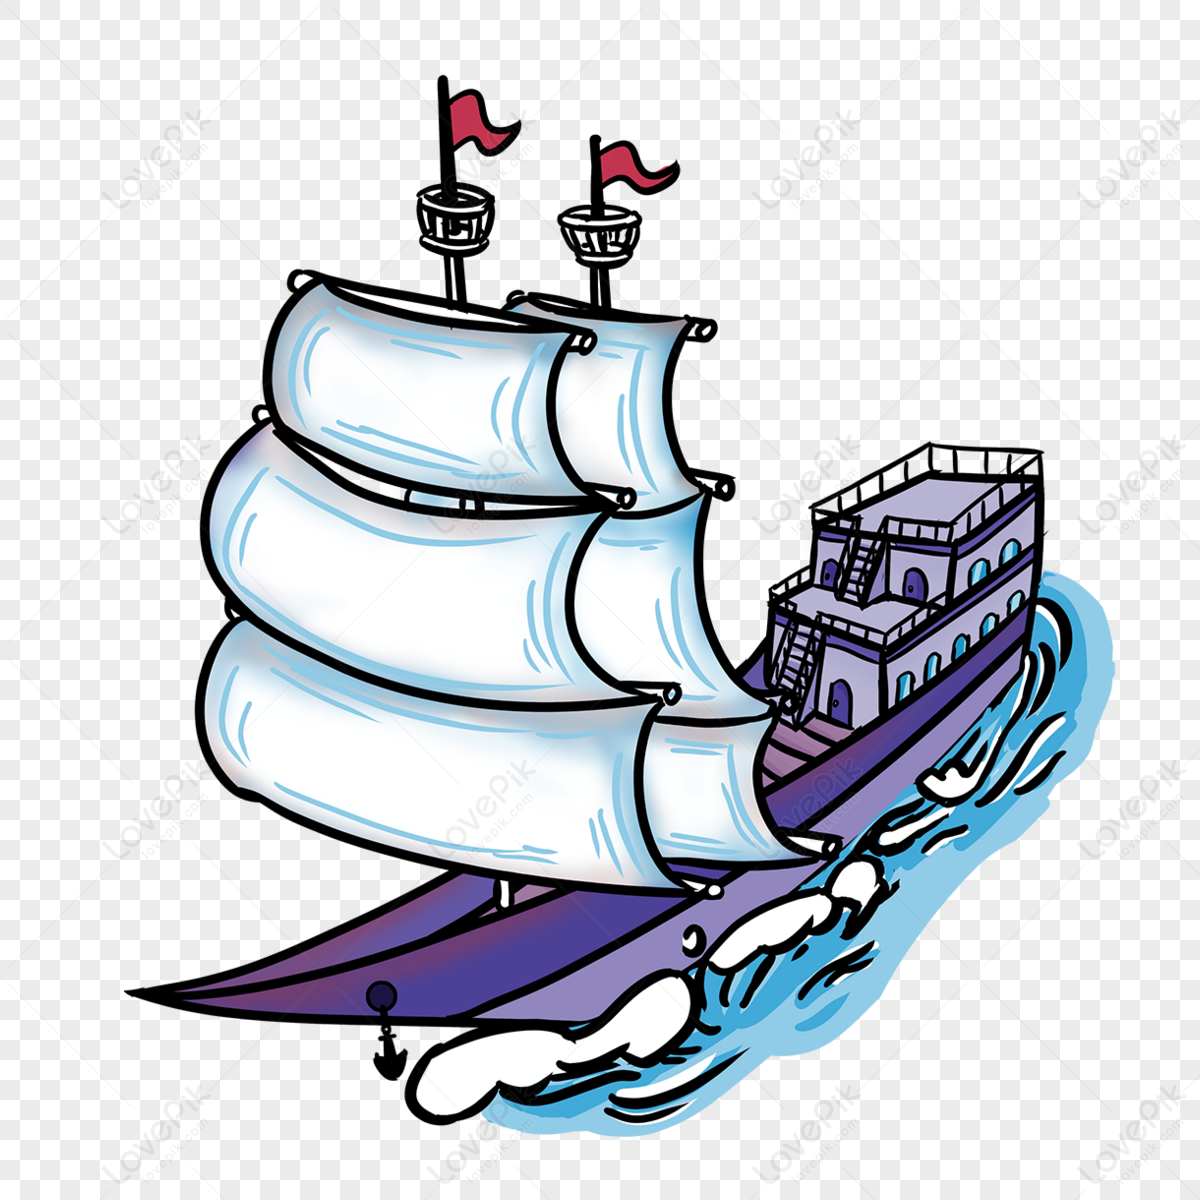 Cartoon style sailboat purple clipart,ferry,spray png image